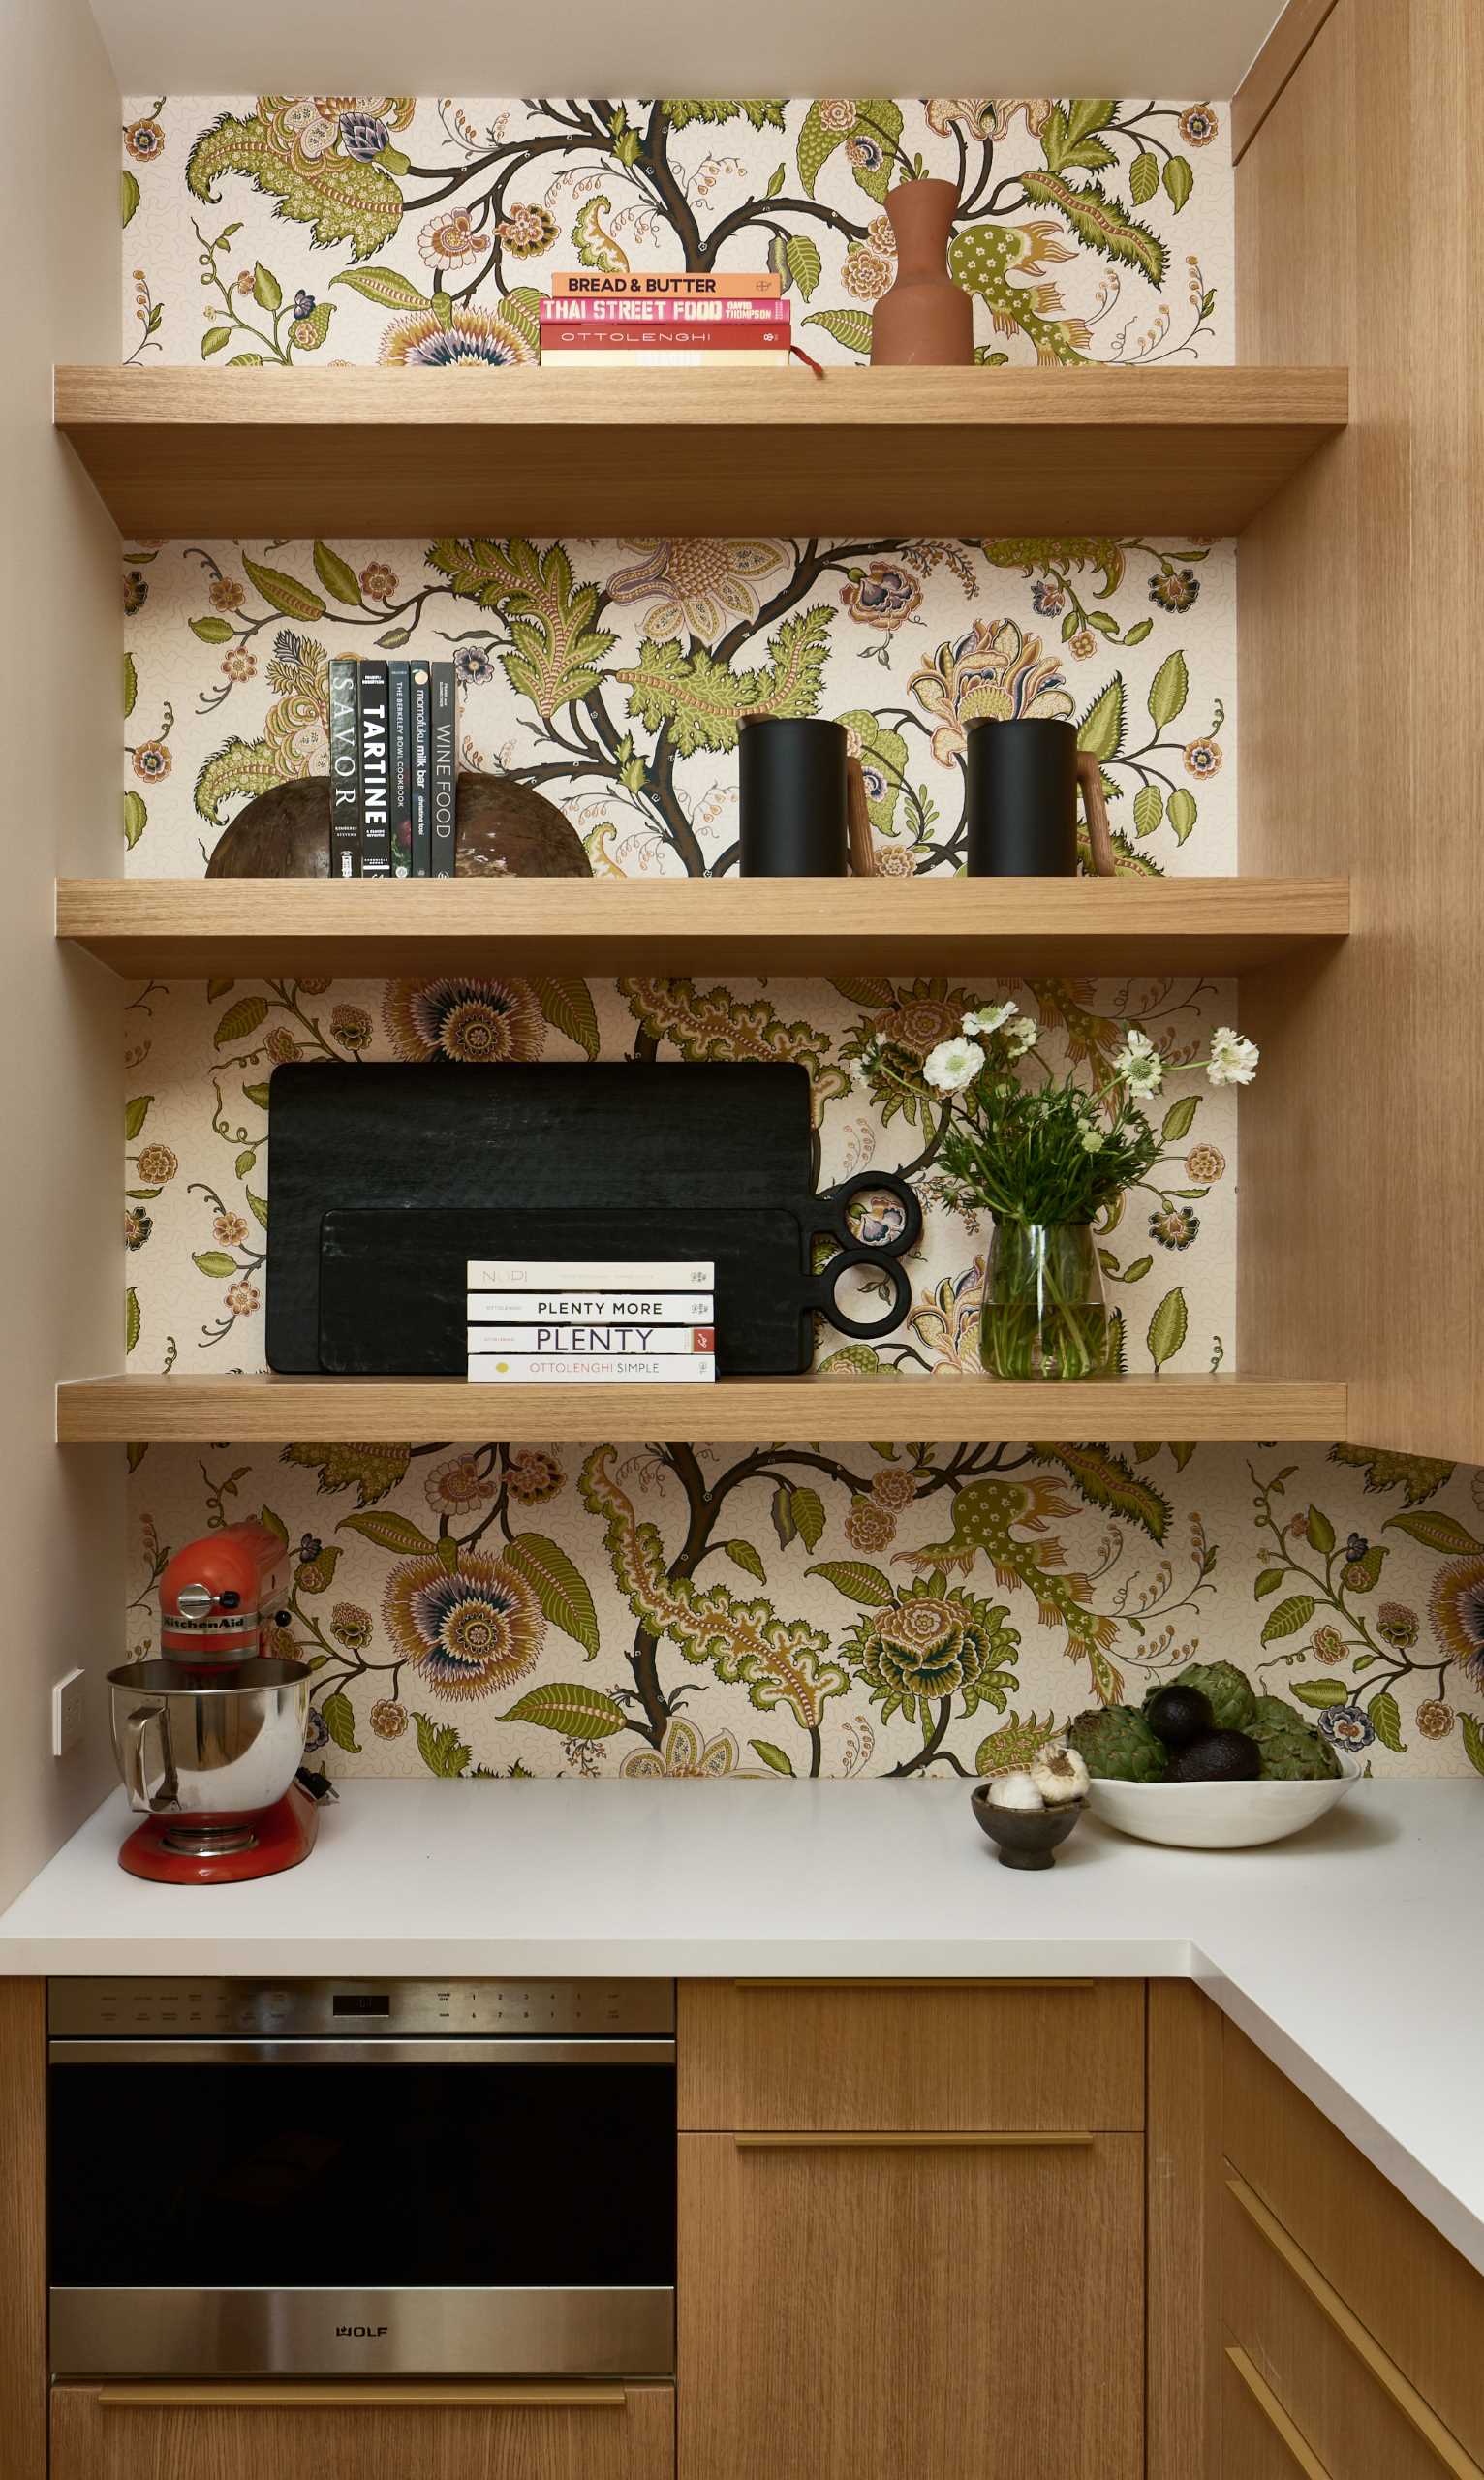 Wallpaper livens up a walk-in pantry.